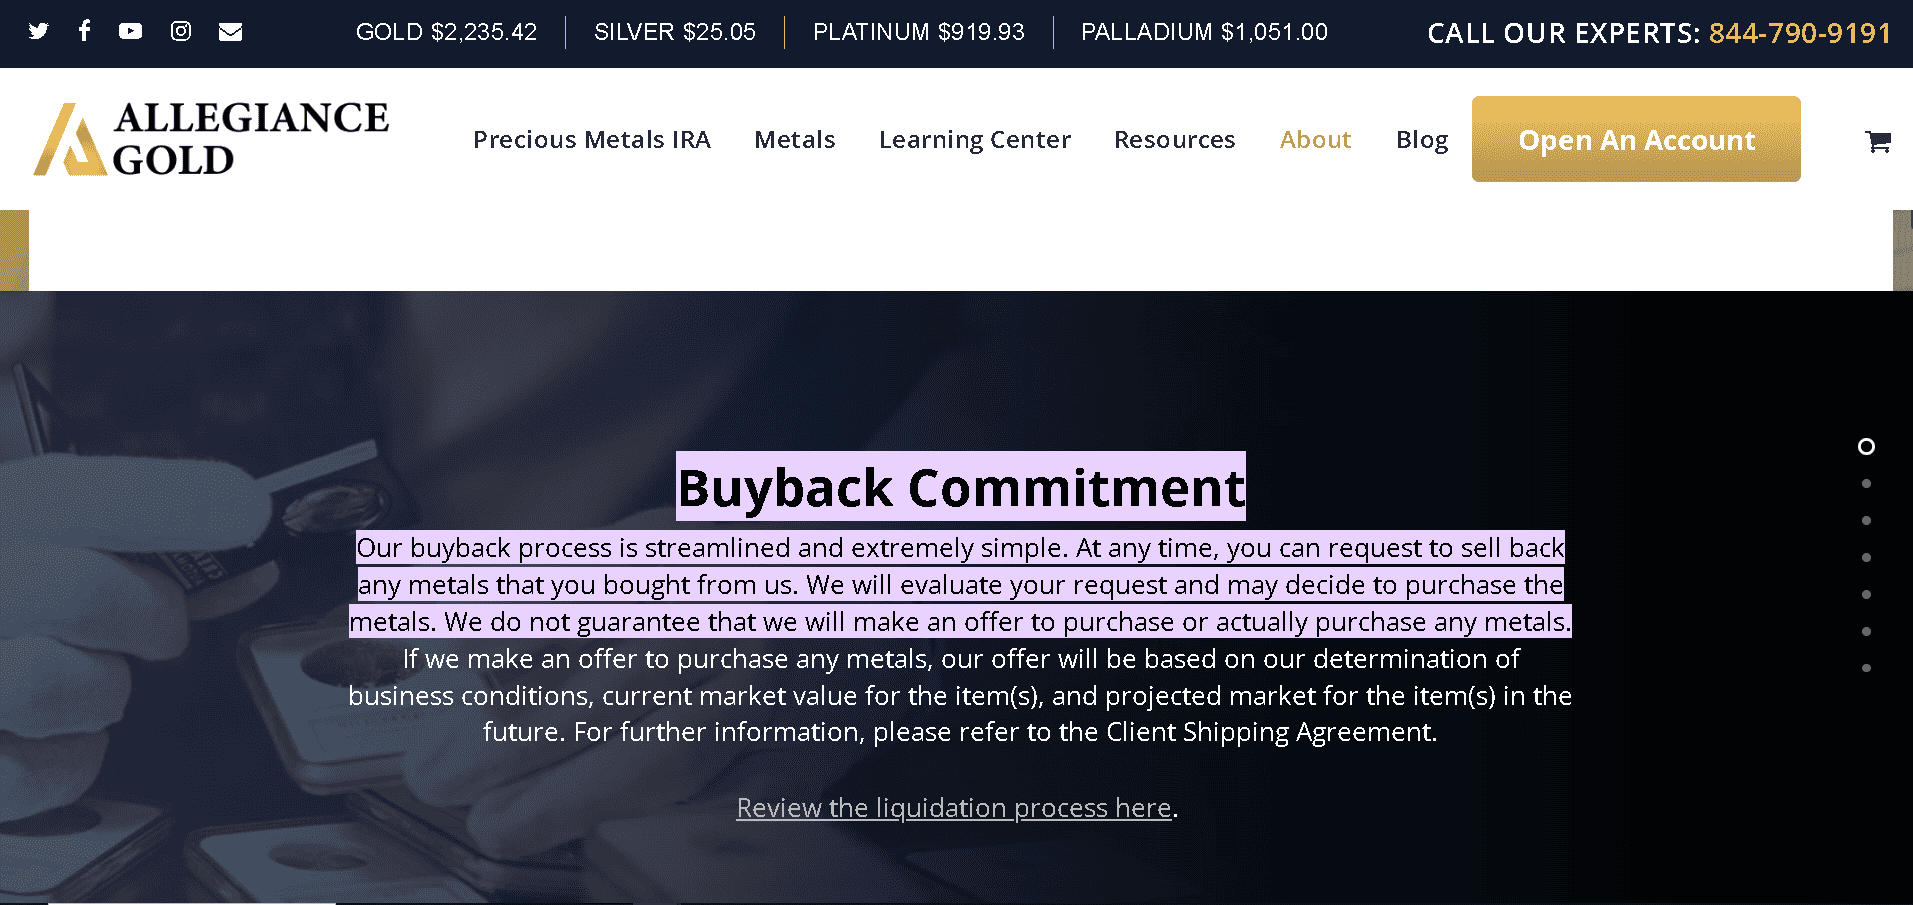 Allegiance Gold buyback policy explained